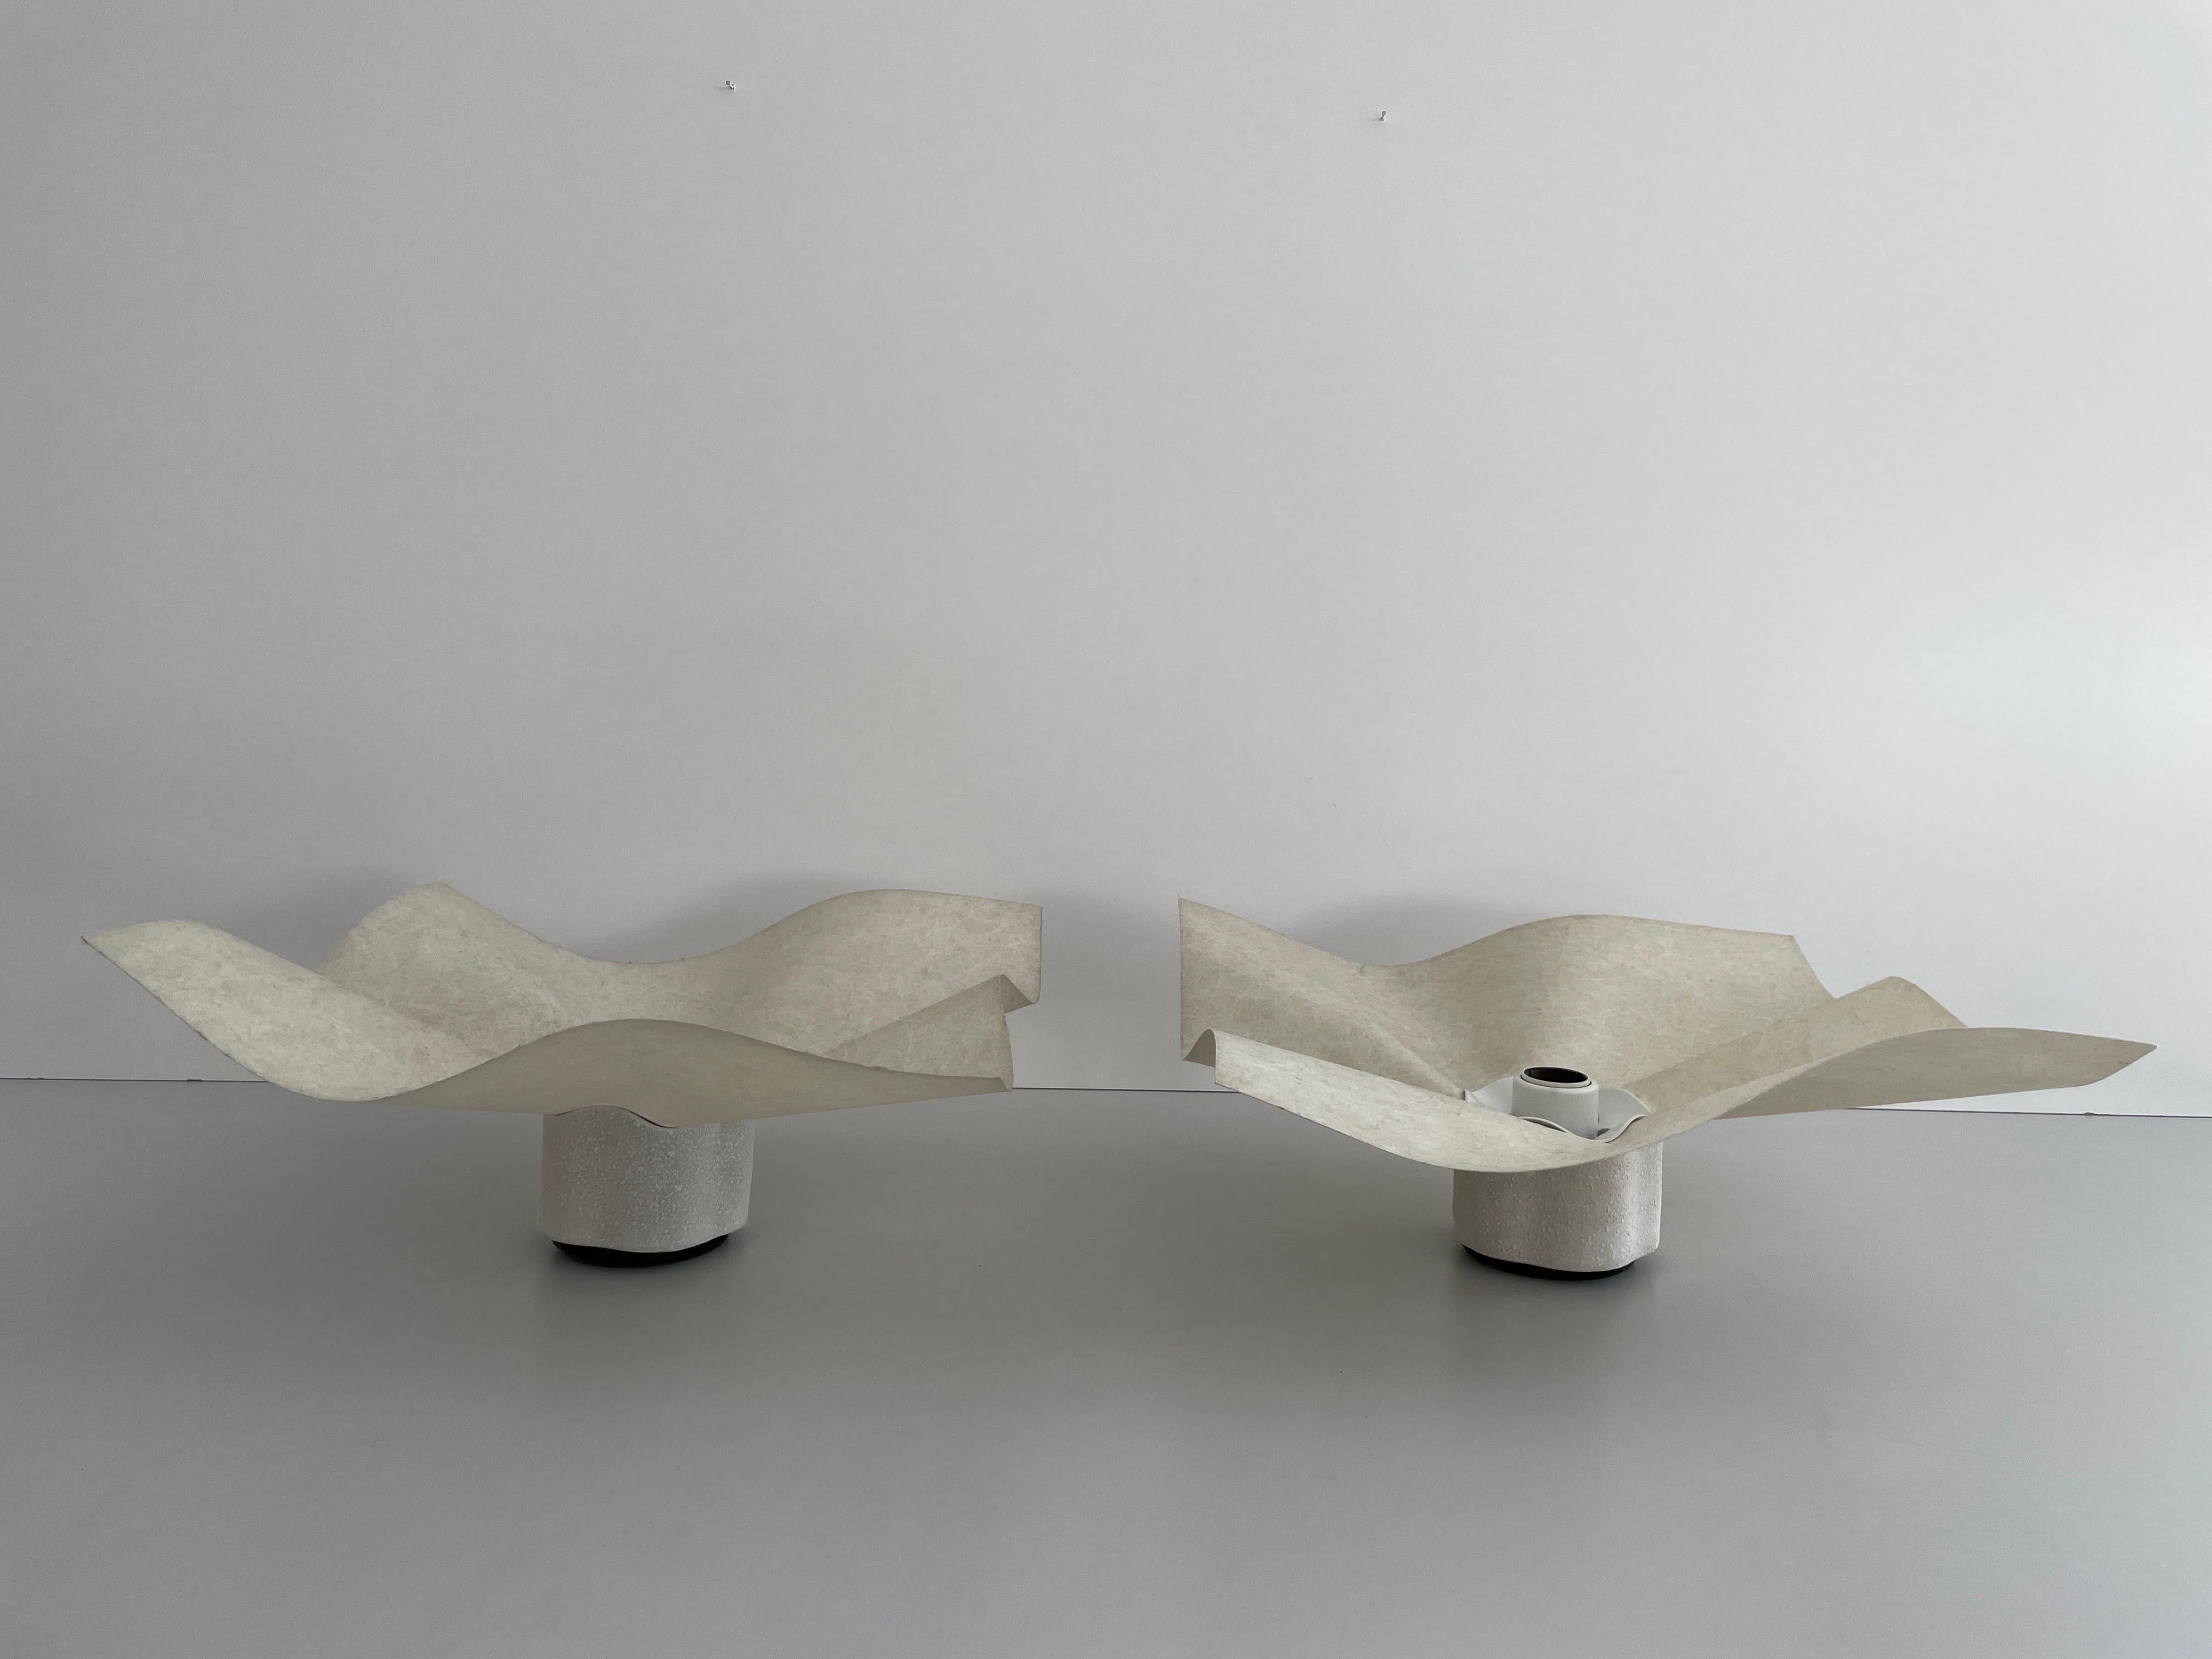 Post-Modern Pair of Sconces or Ceiling Lamps by Mario Bellini for Artemide, 1970s, Italy For Sale